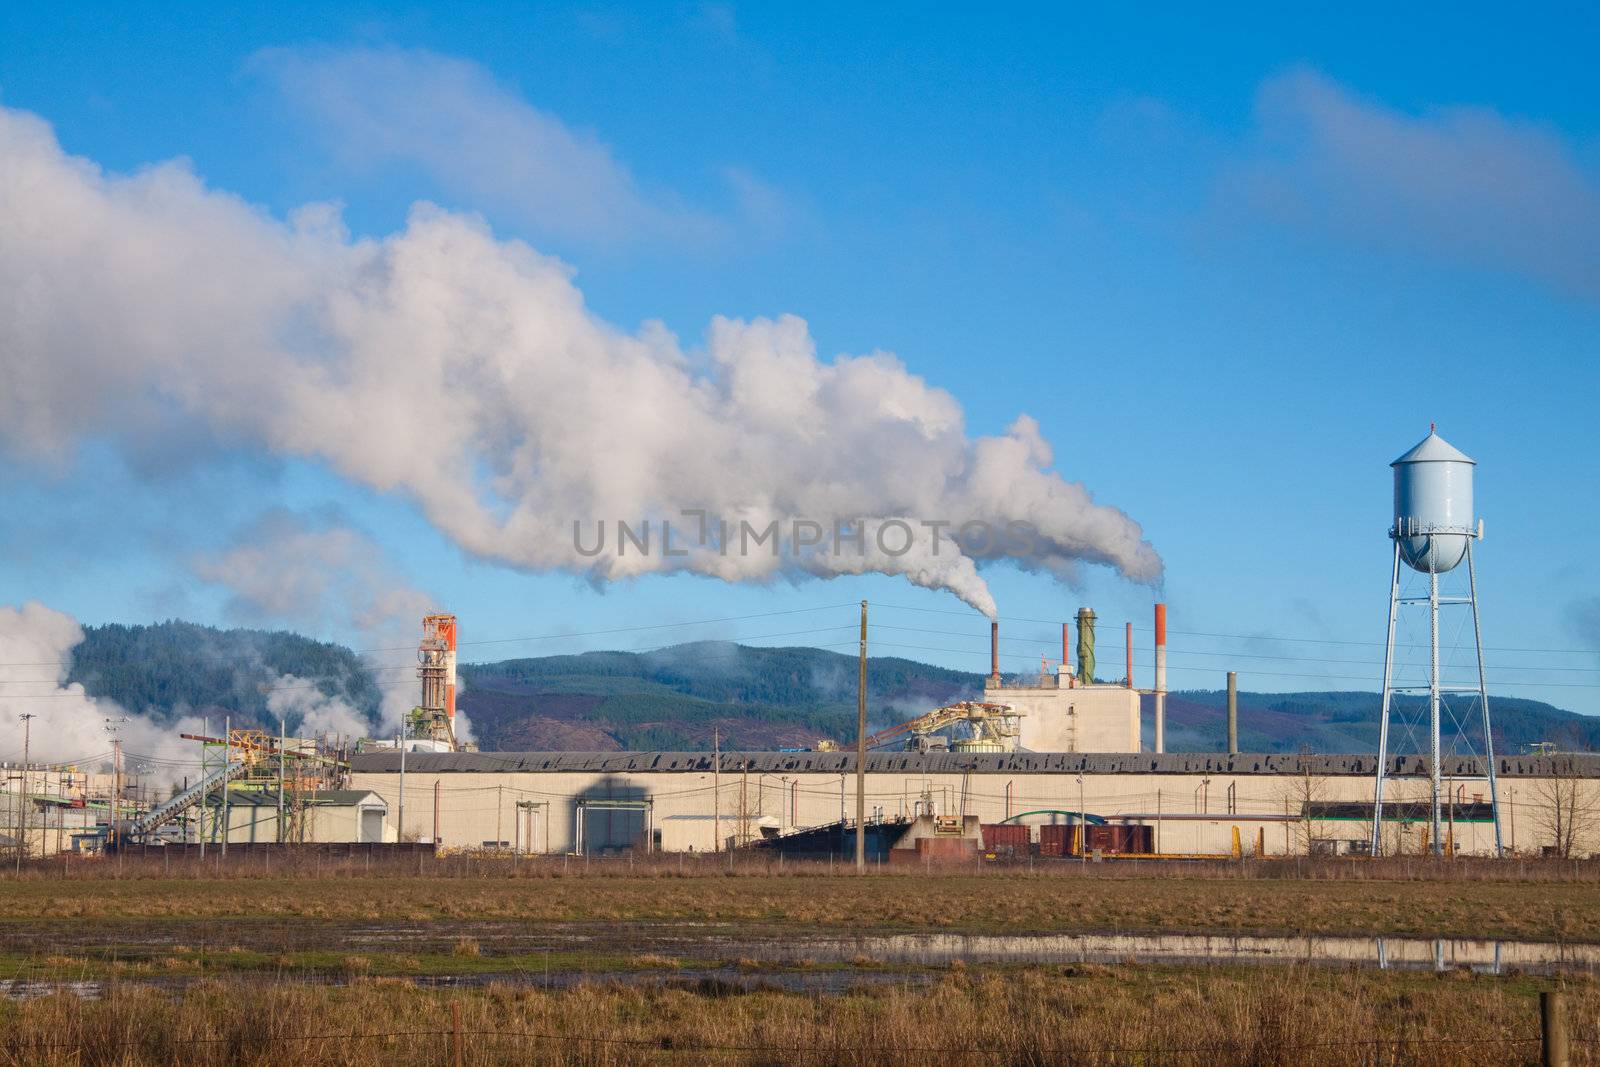 A paper mill in Oregon emits smoke and pollution into the clean air and blue sky overhead.